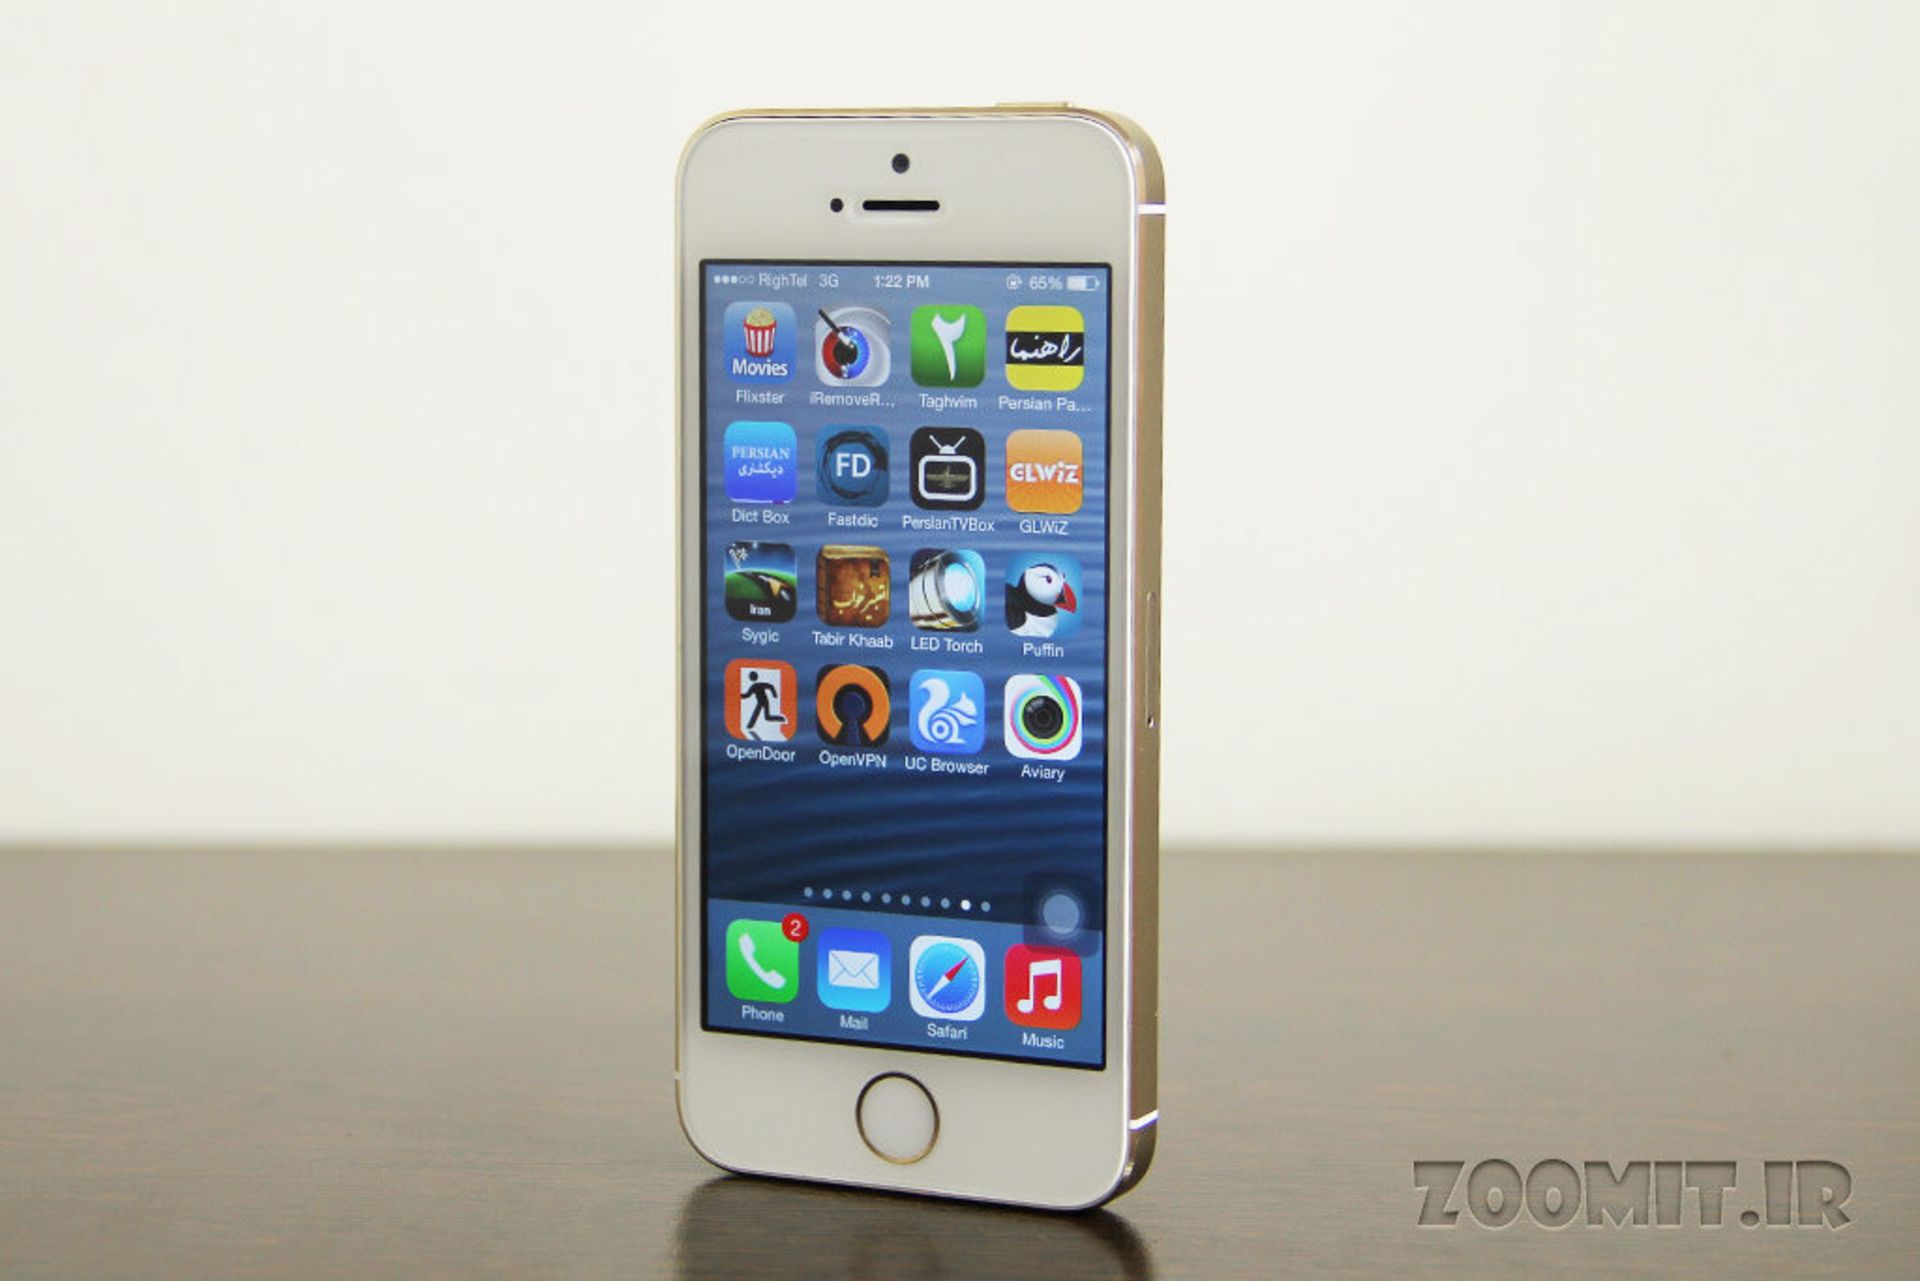 iphone 5s zoomit 22 e6197